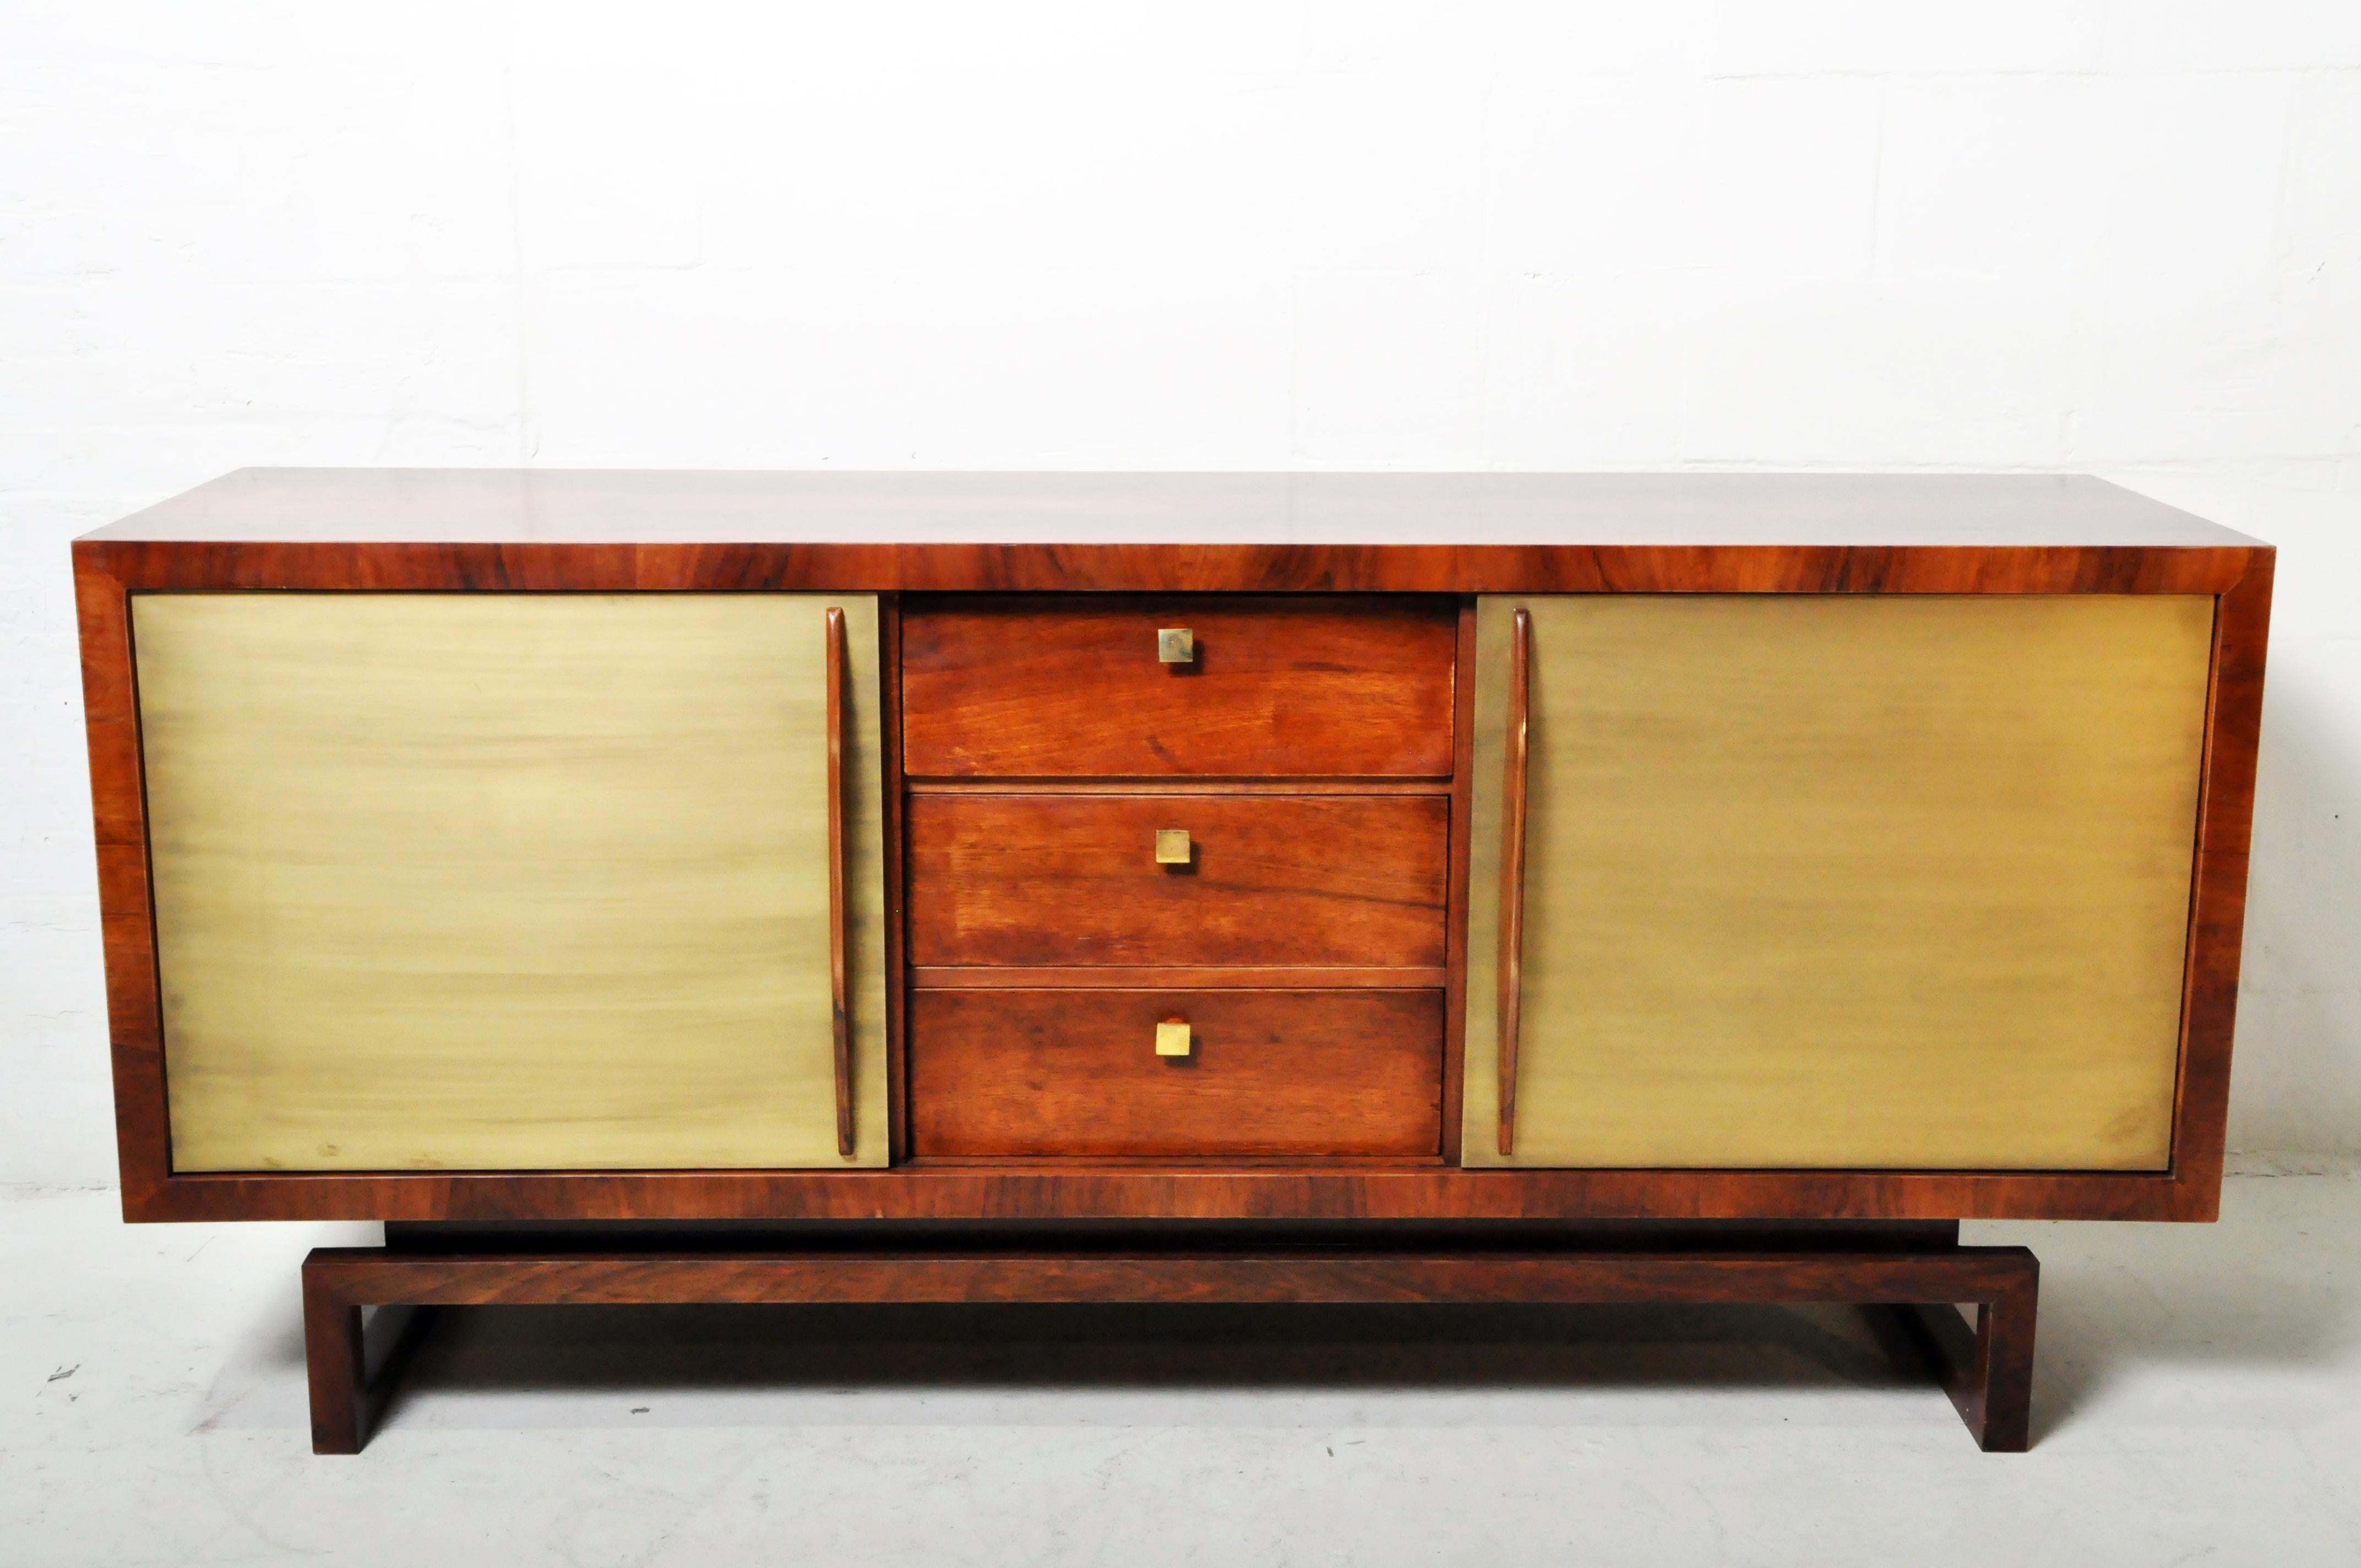 A Hungarian Mid-Century Modern sideboard in walnut veneer and brass-sheathed doors. Hungarian mid-Century Furniture rarely utilized exotic imported hardwoods, such as teak, and substituted native walnut wood instead. This sideboard features a richly